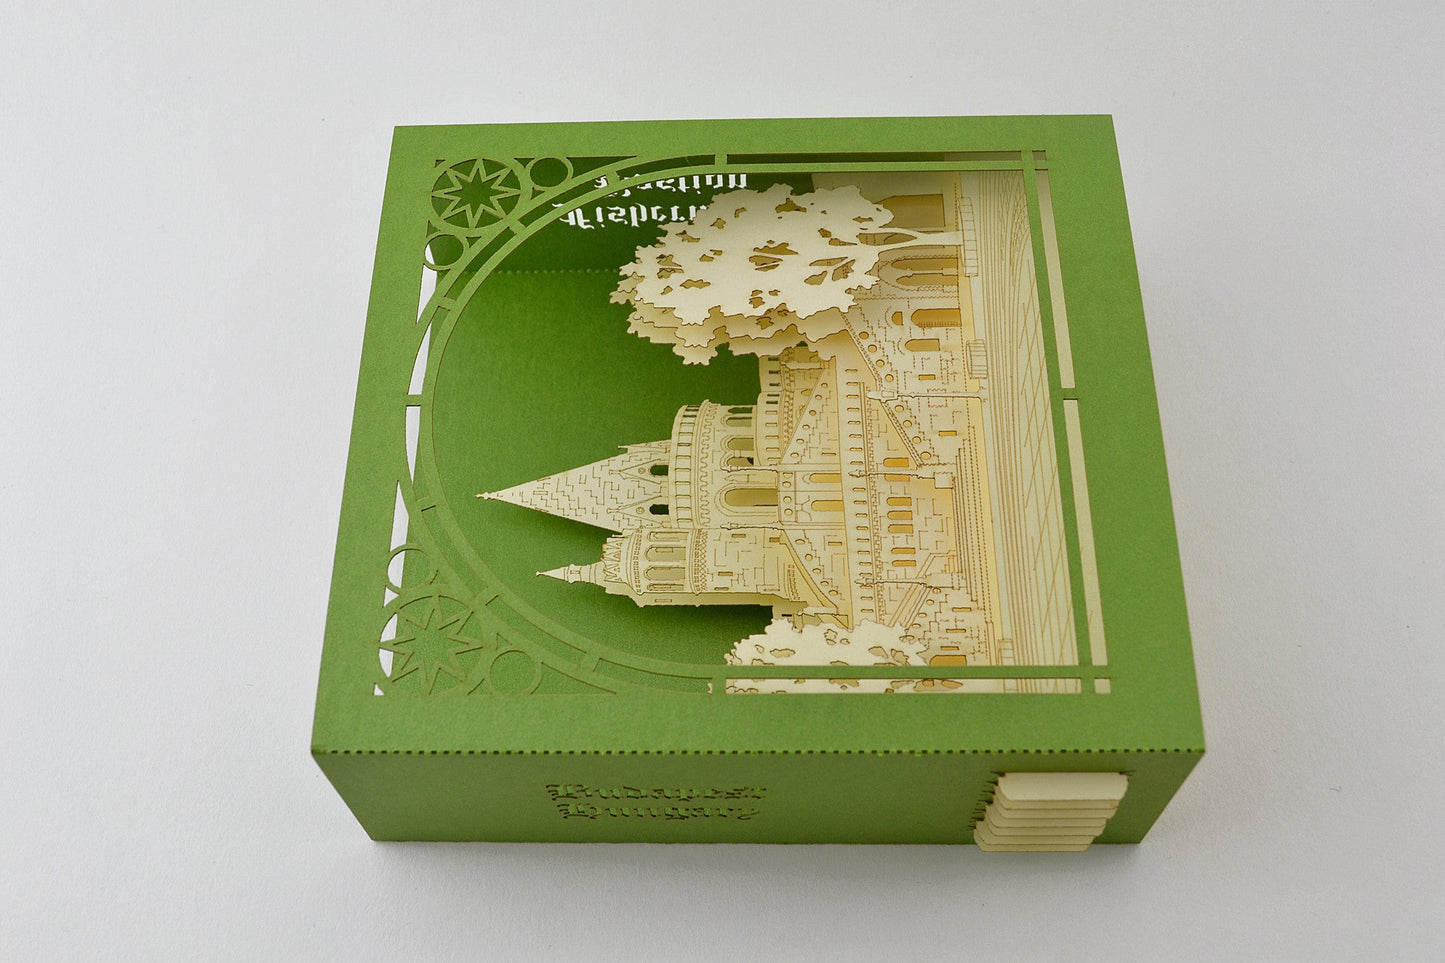 The Fisherman's Bastion, Budapest, Hungary pop-up card - ColibriGift